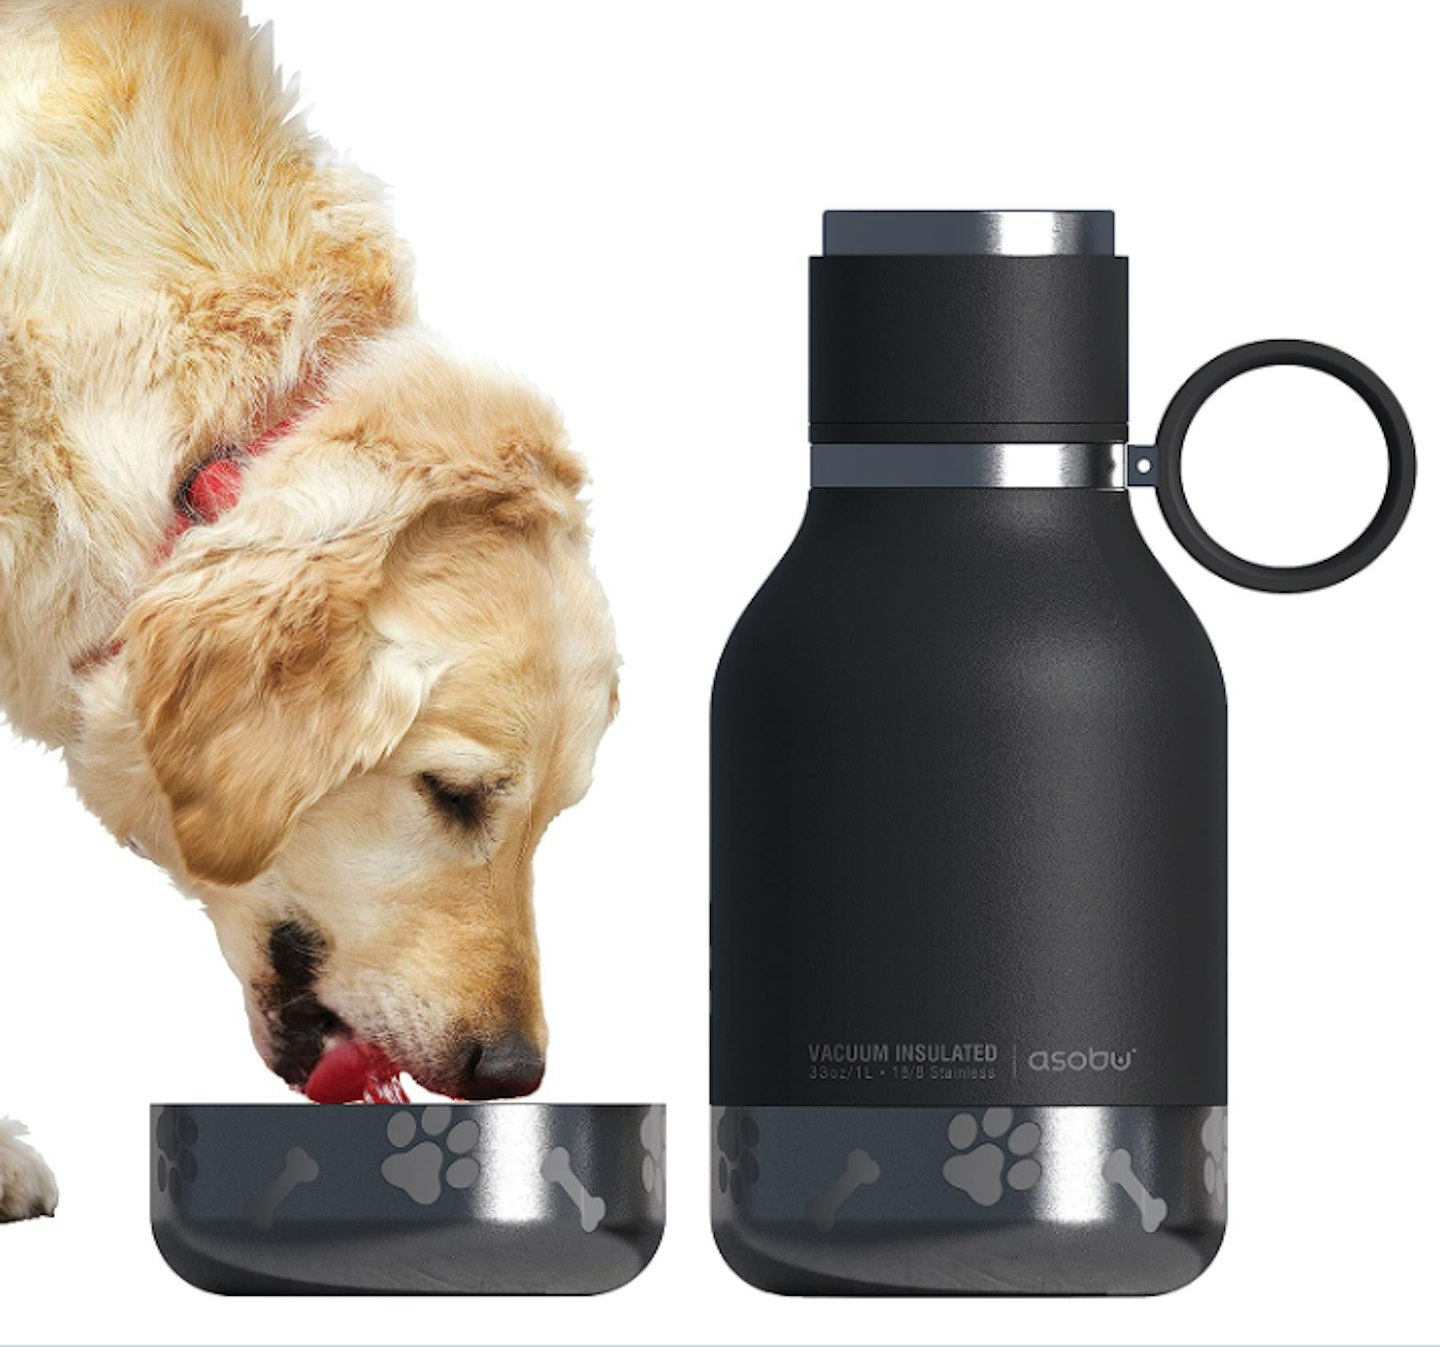 Asobu Dog Bowl and Stainless Steel Insulated Water Bottle